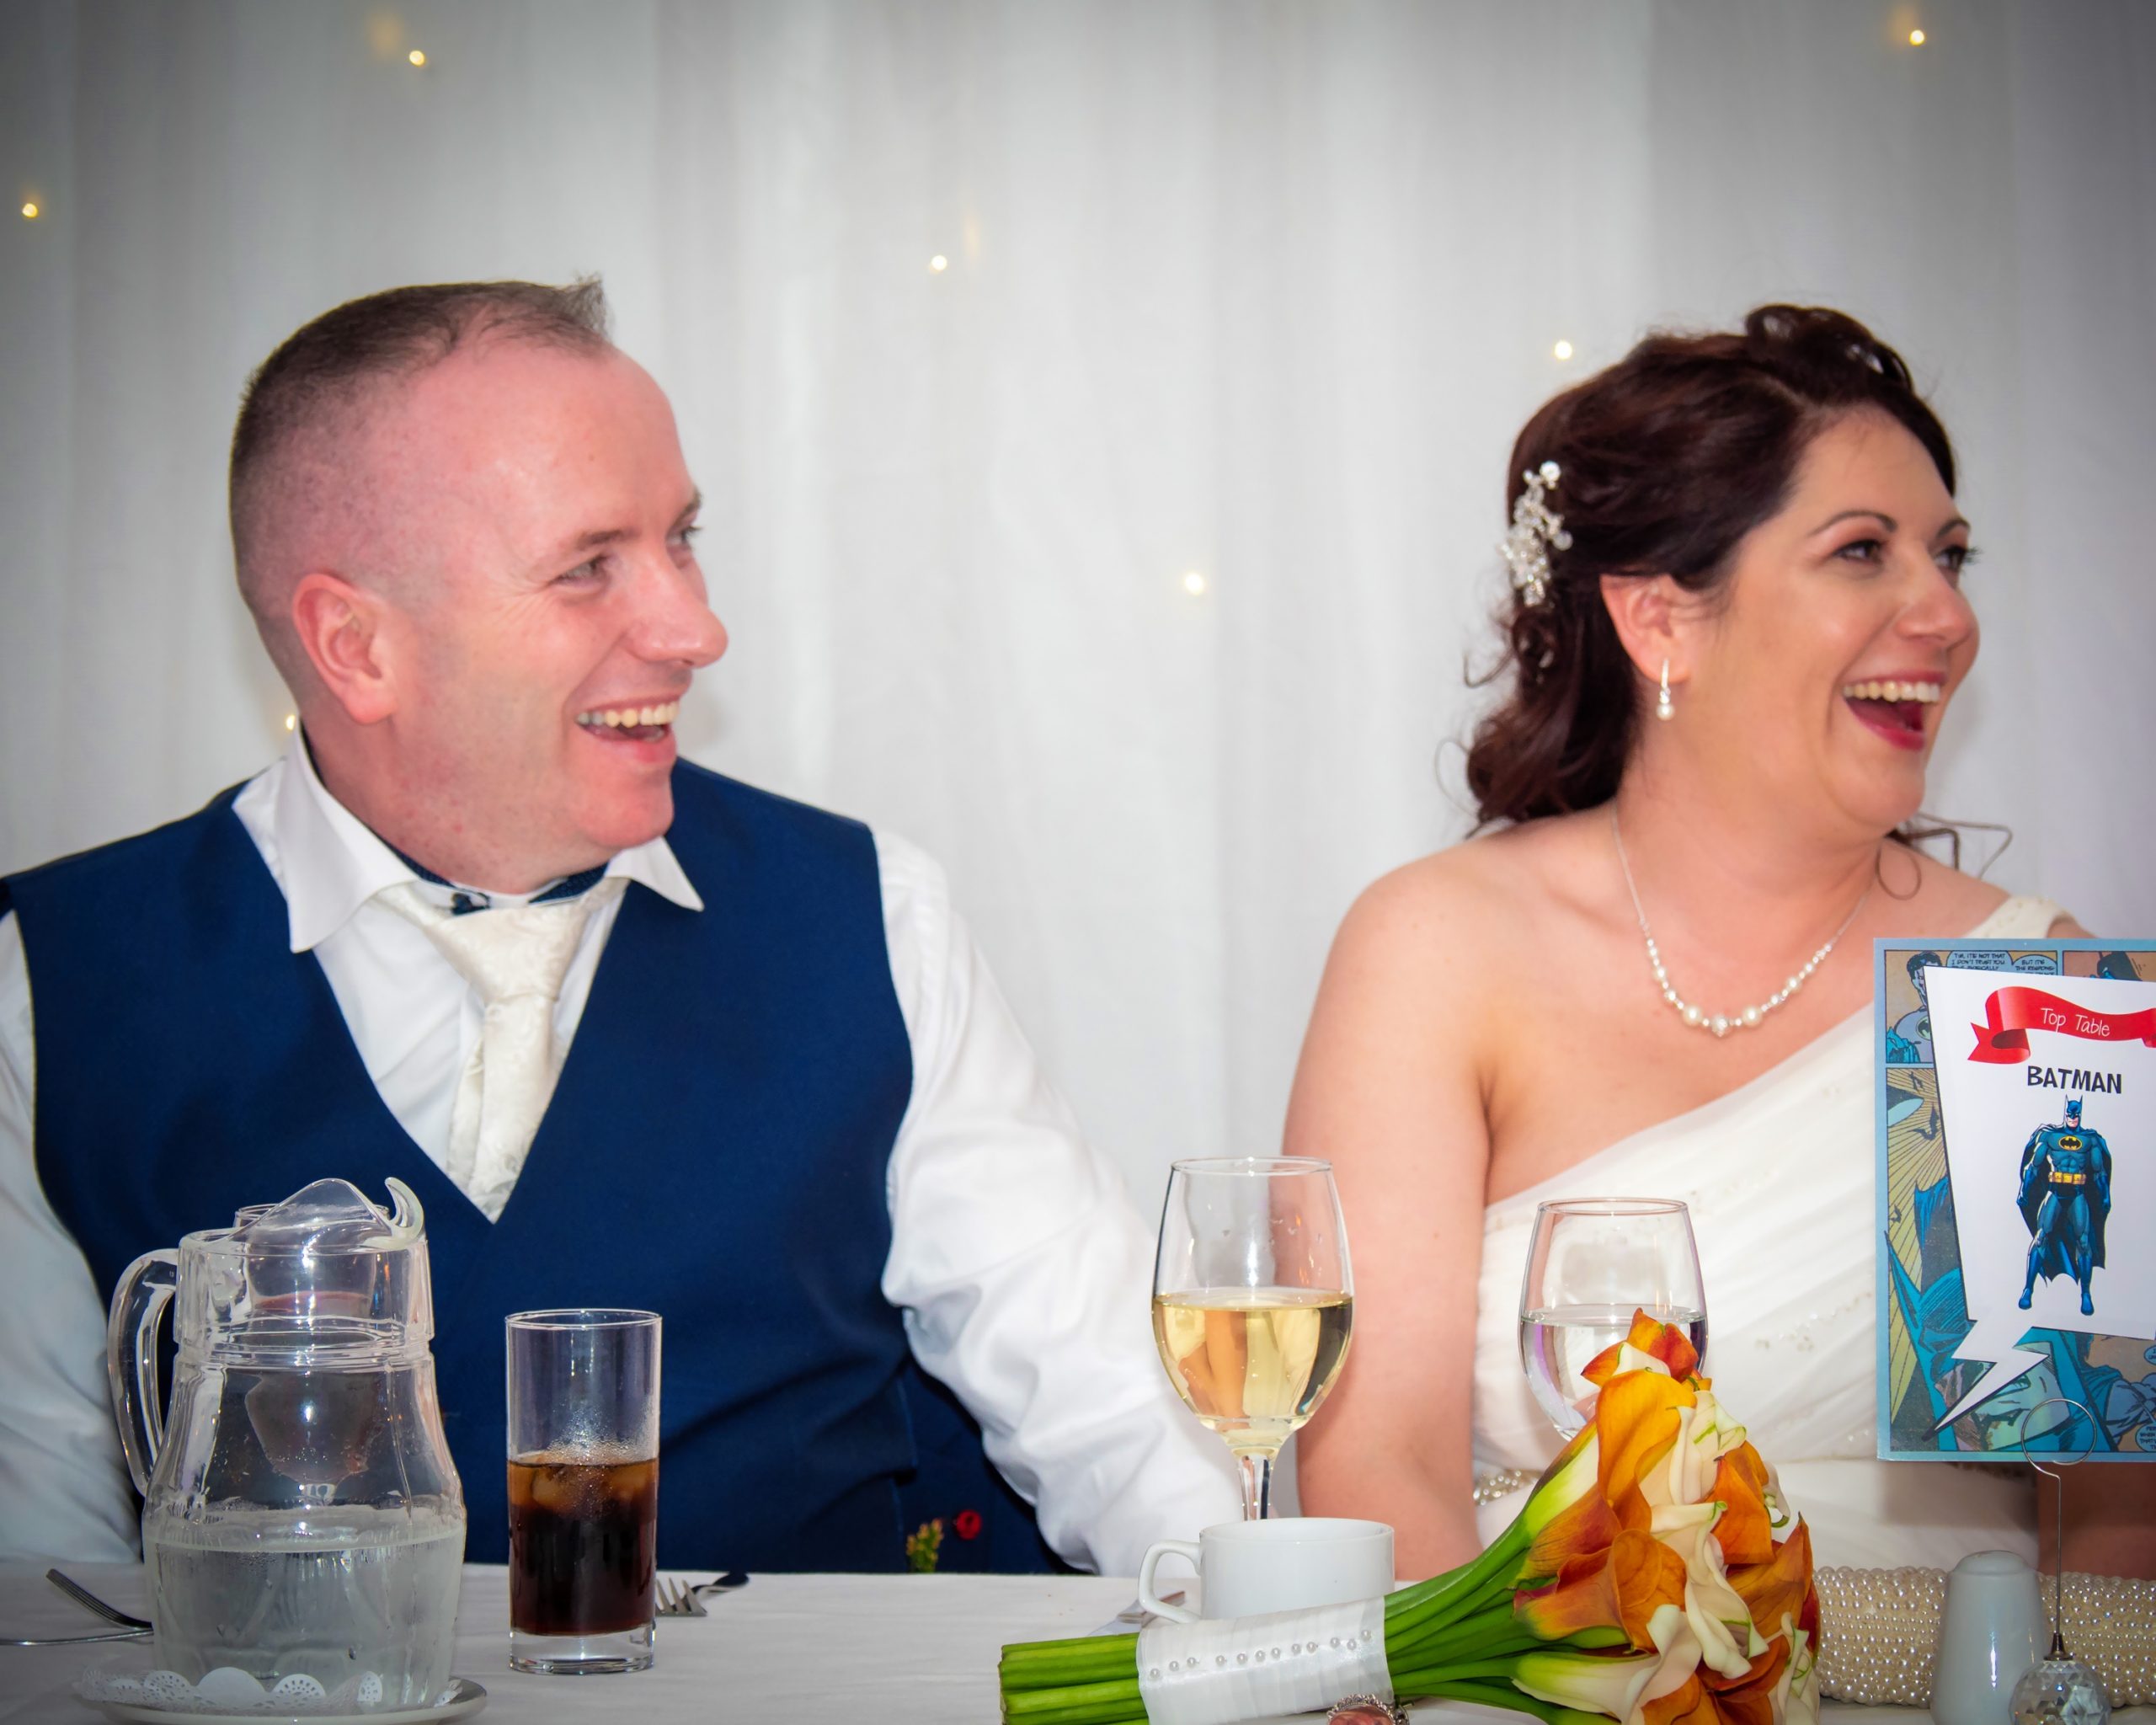 The happy couple share a laugh together during the Best Man's speech!